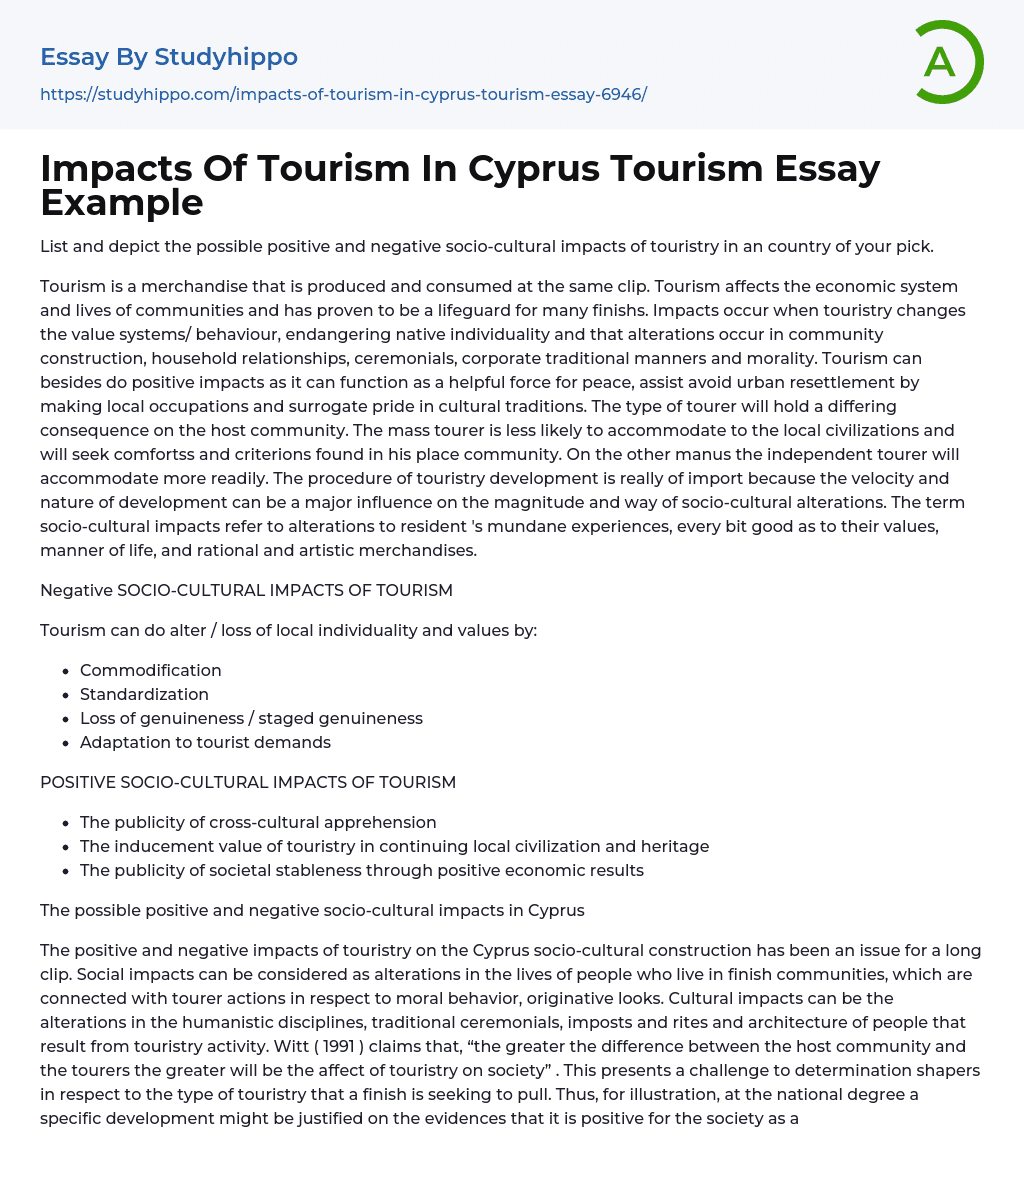 Impacts Of Tourism In Cyprus Tourism Essay Example